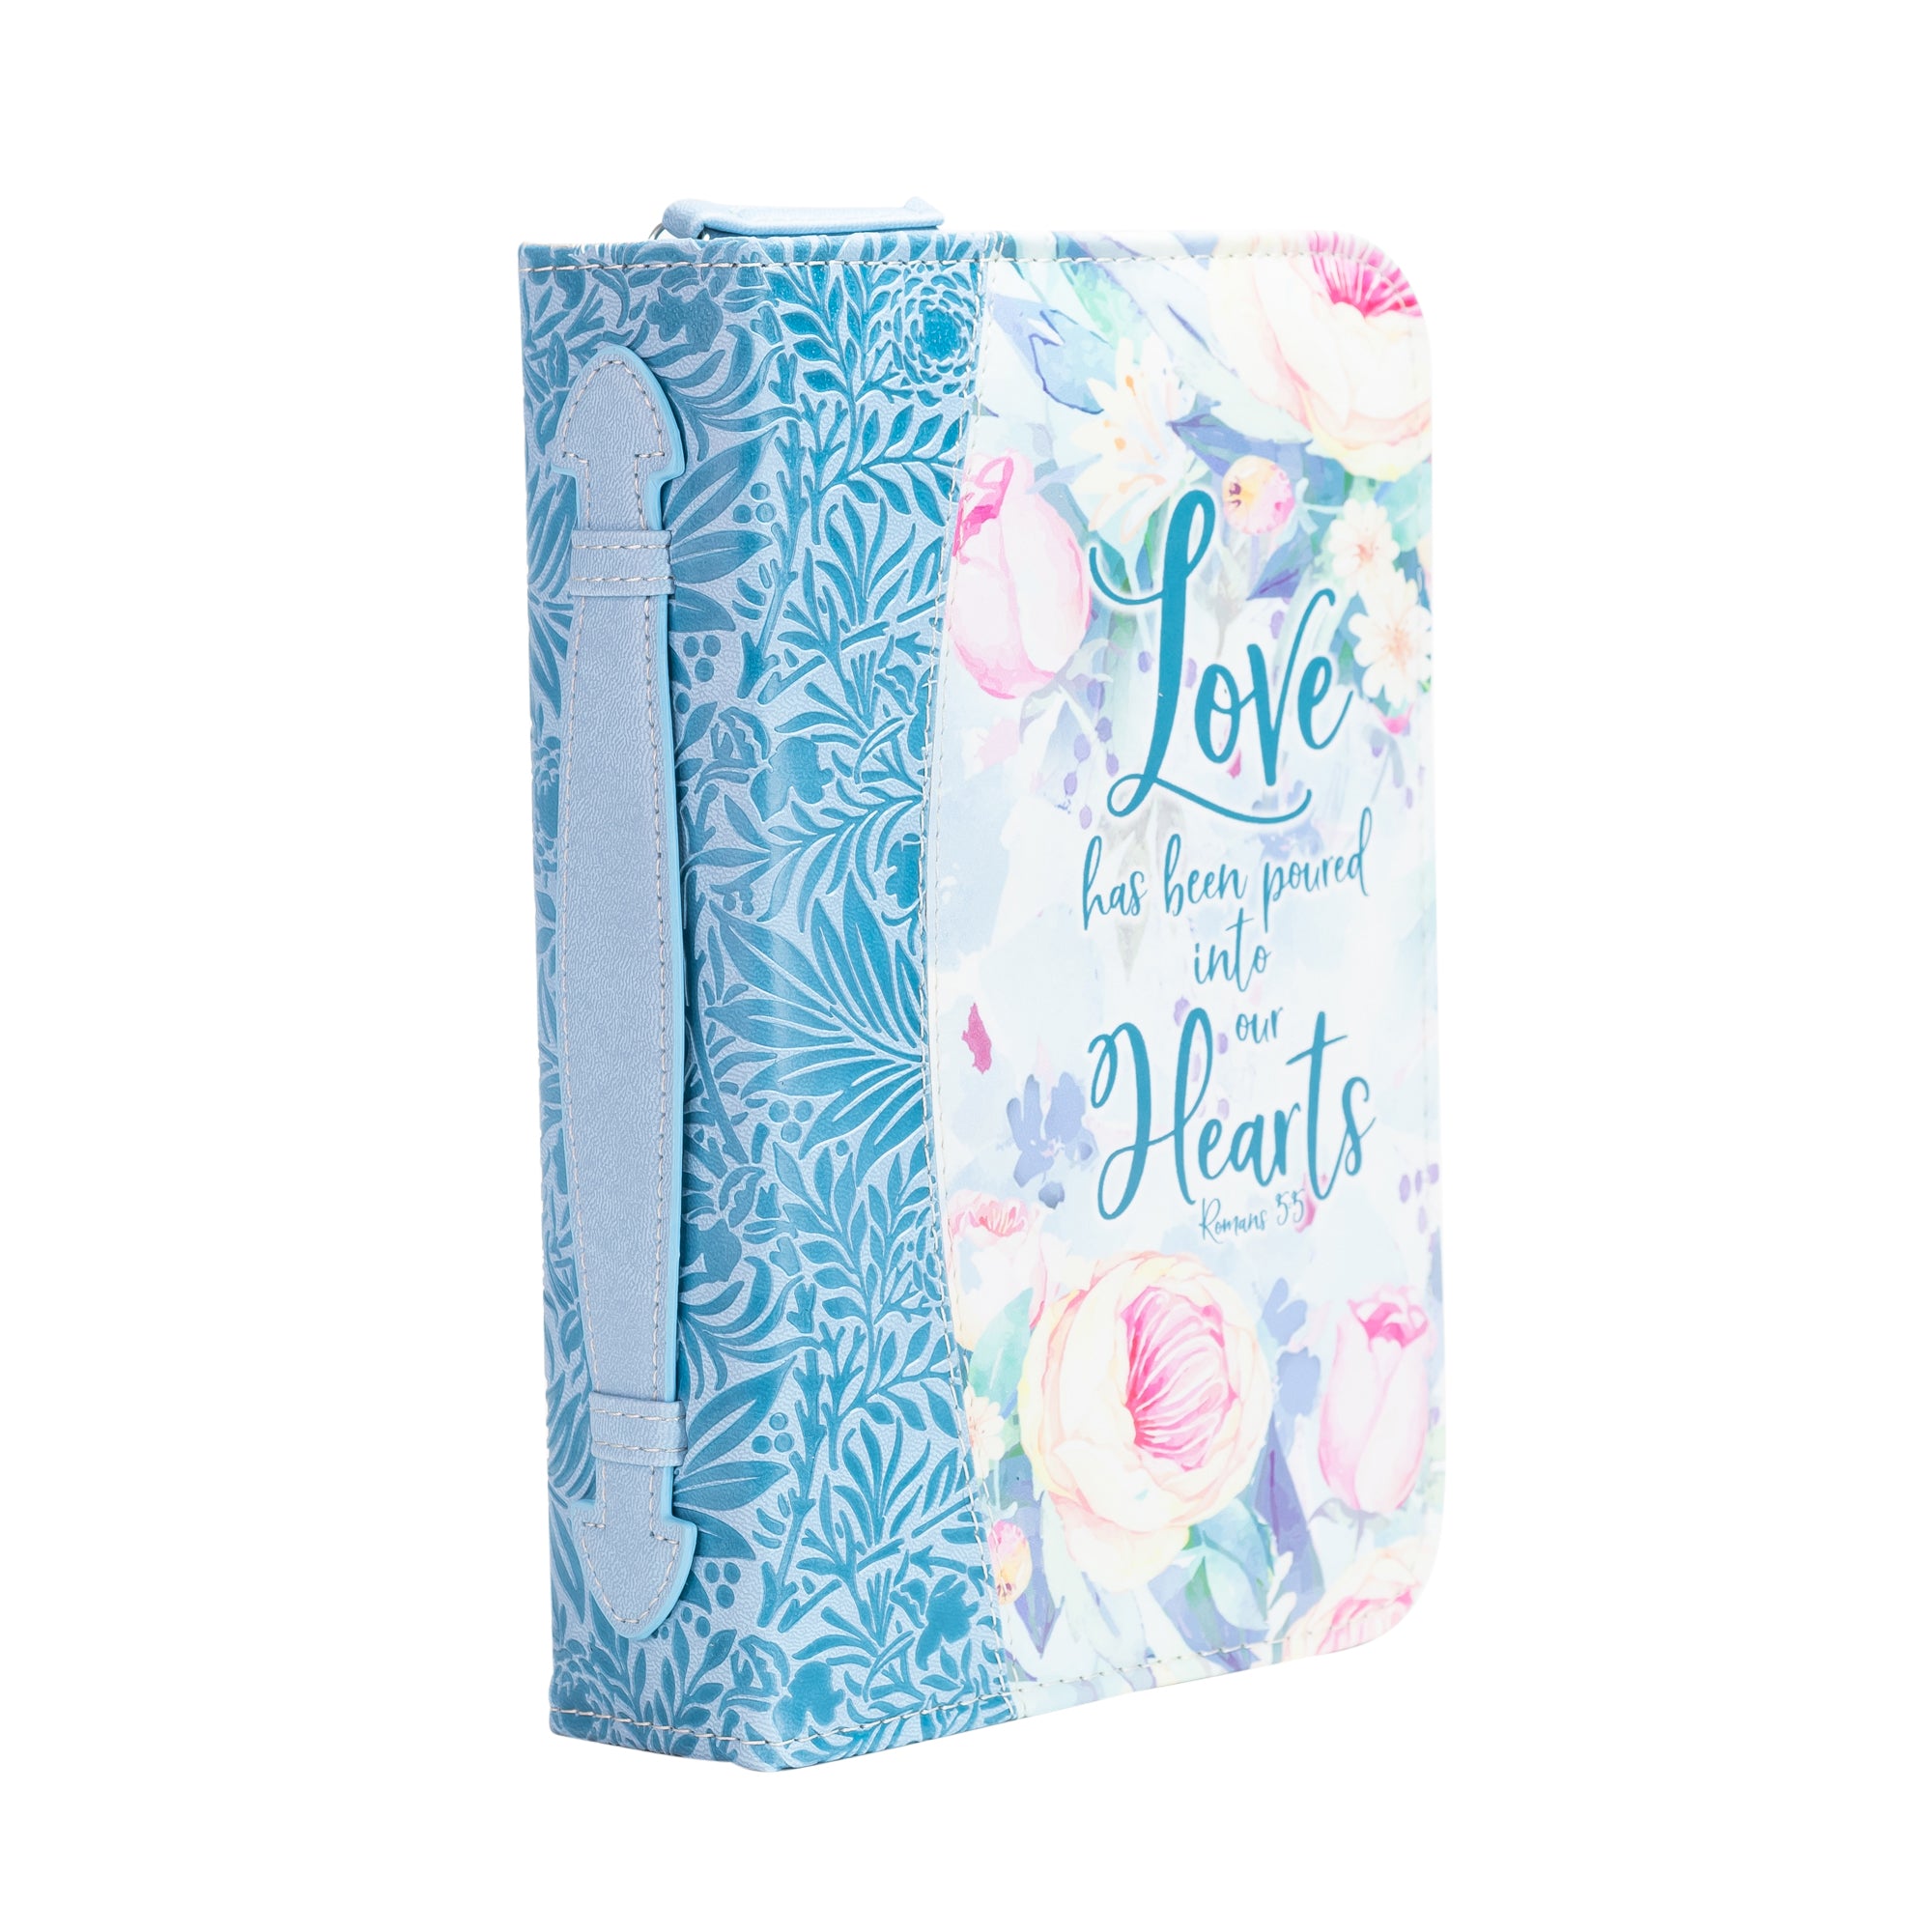 Divine Details: Bible Cover - Blue Floral Love has been poured into our Hearts - Romans 5:5